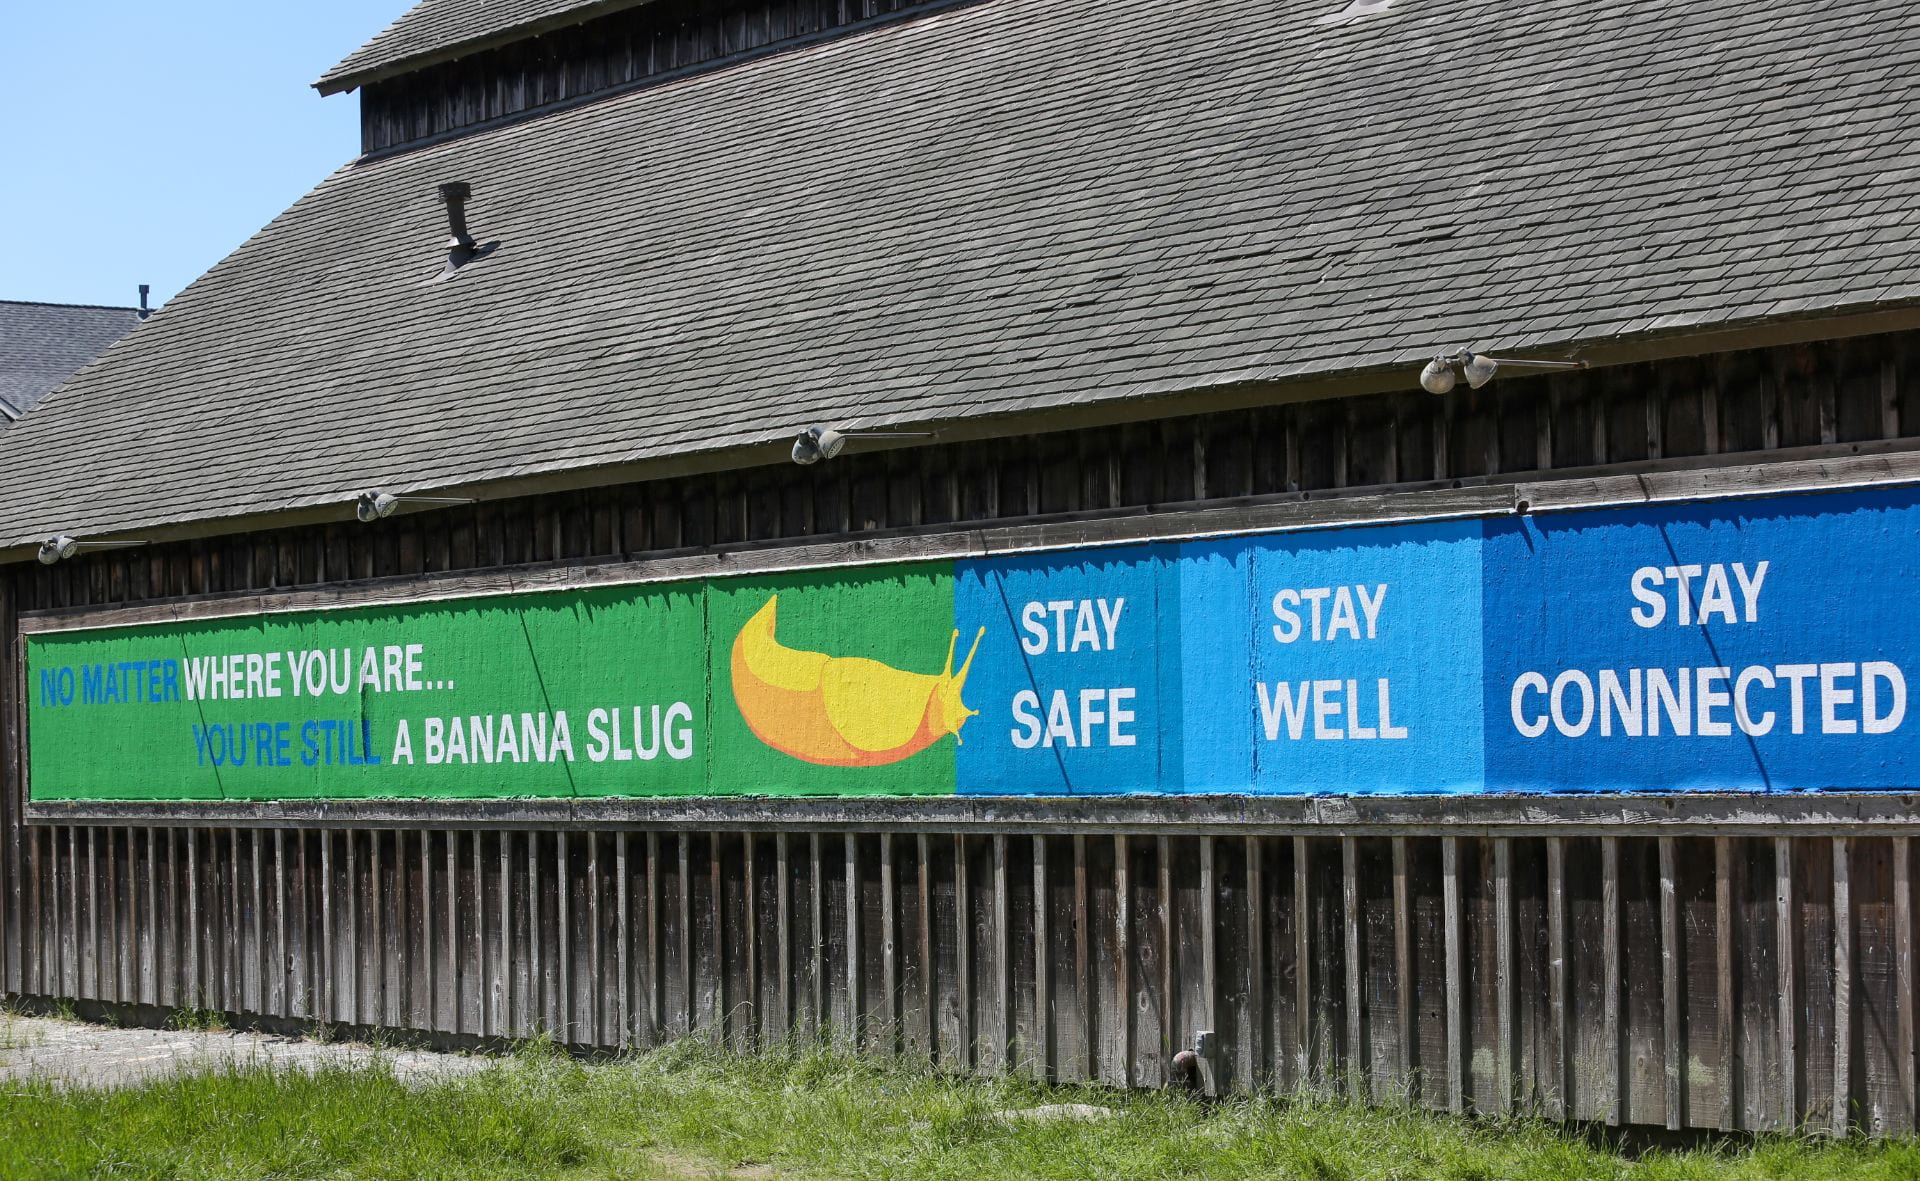 Photo of campus mural at entrance that states, "No matter where you are, you are still a banana slug. Stay safe. Stay well. Stay connected."